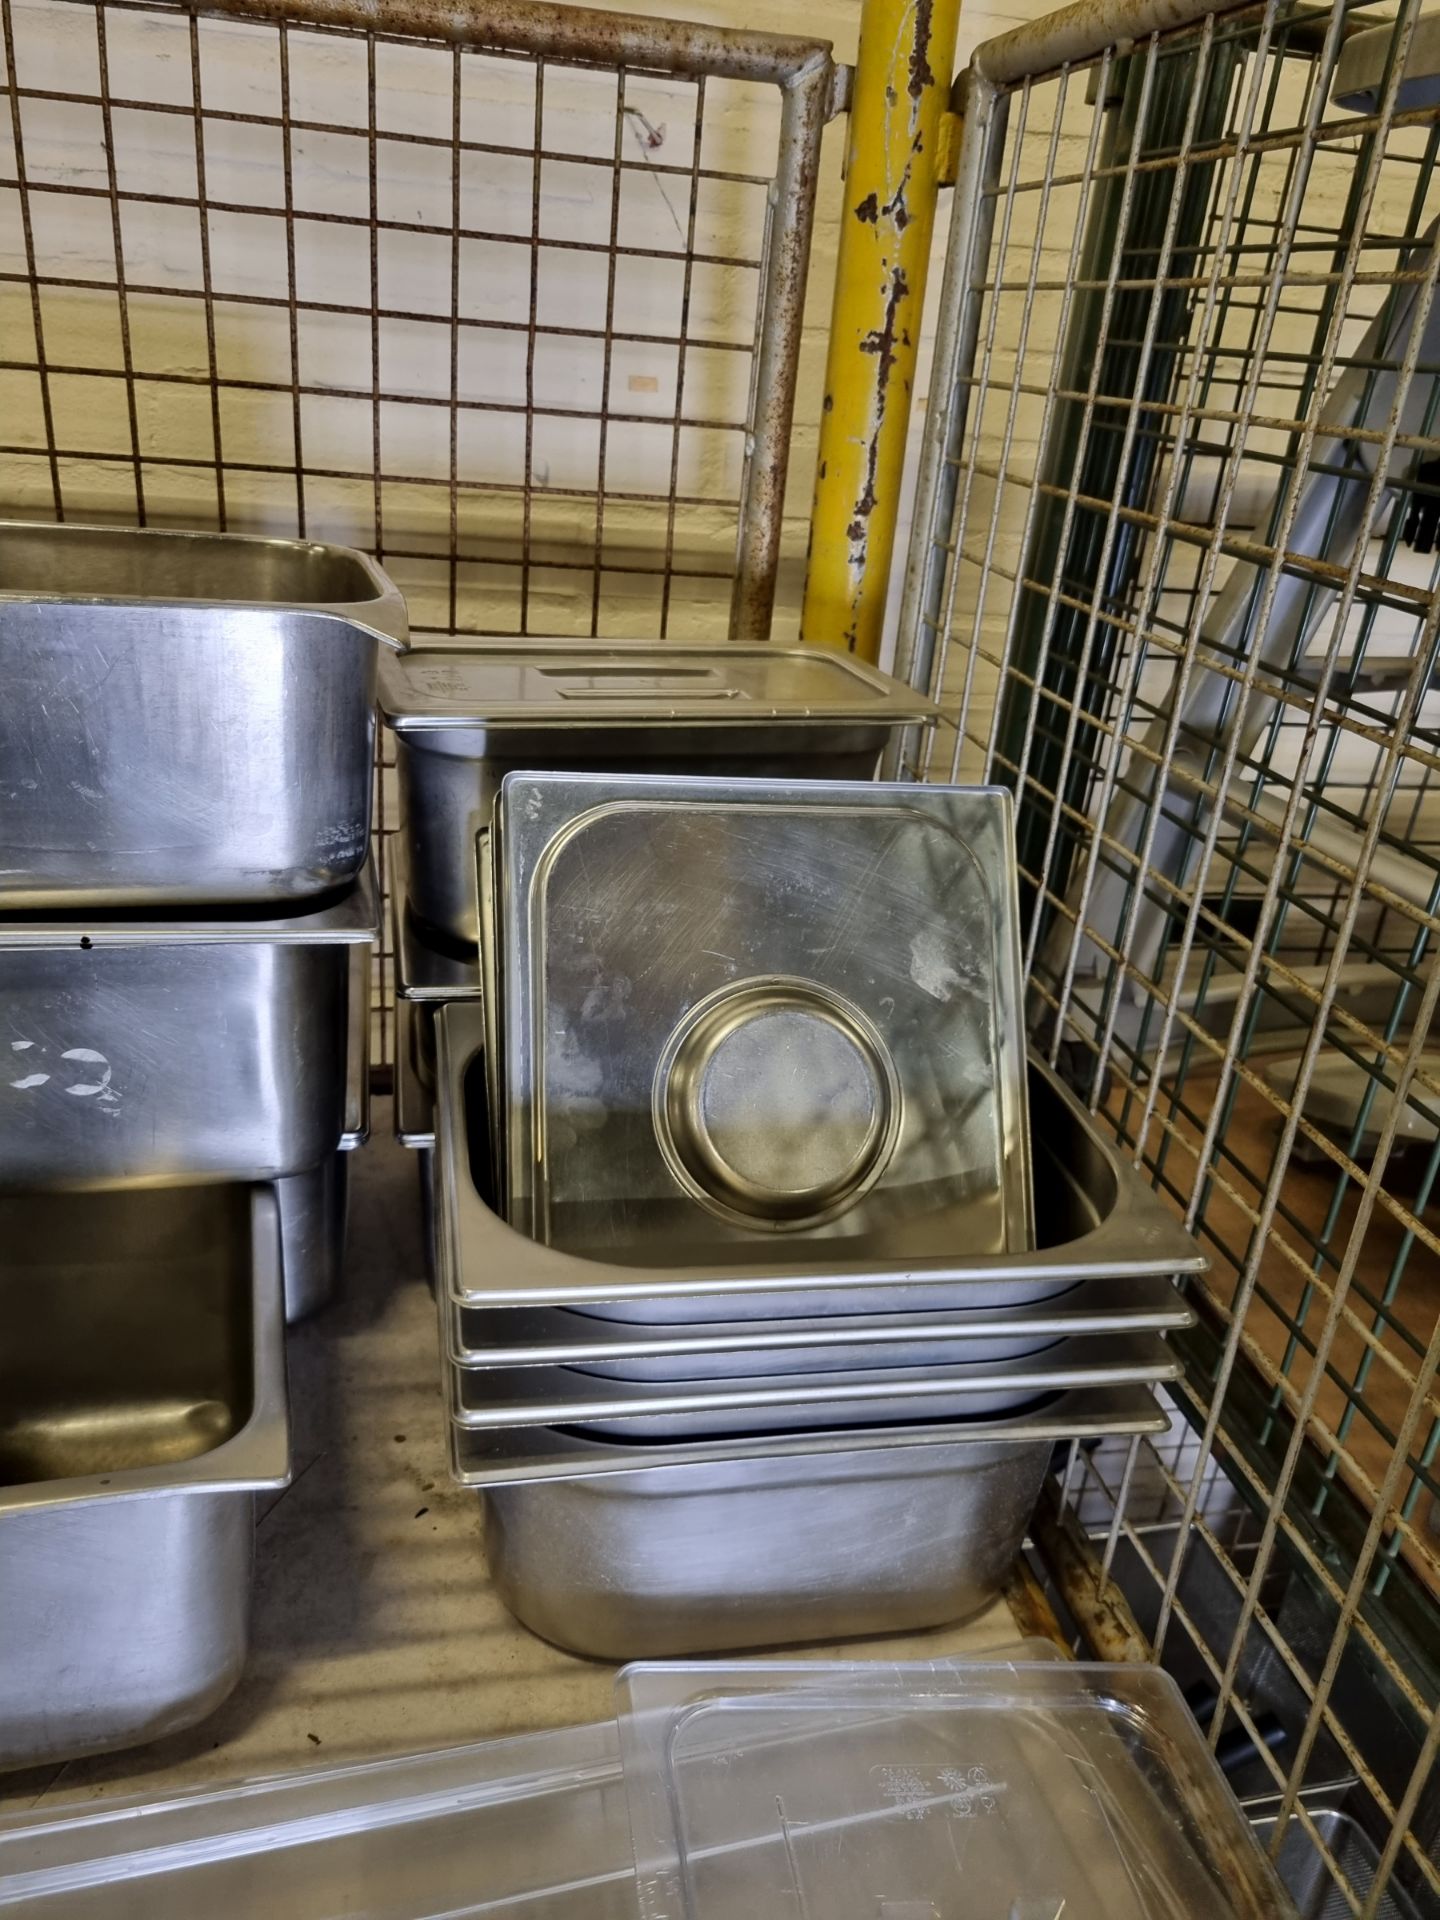 Catering equipment - mixed sized gastronorm pans and lids - stainless steel and plastic - Image 3 of 5